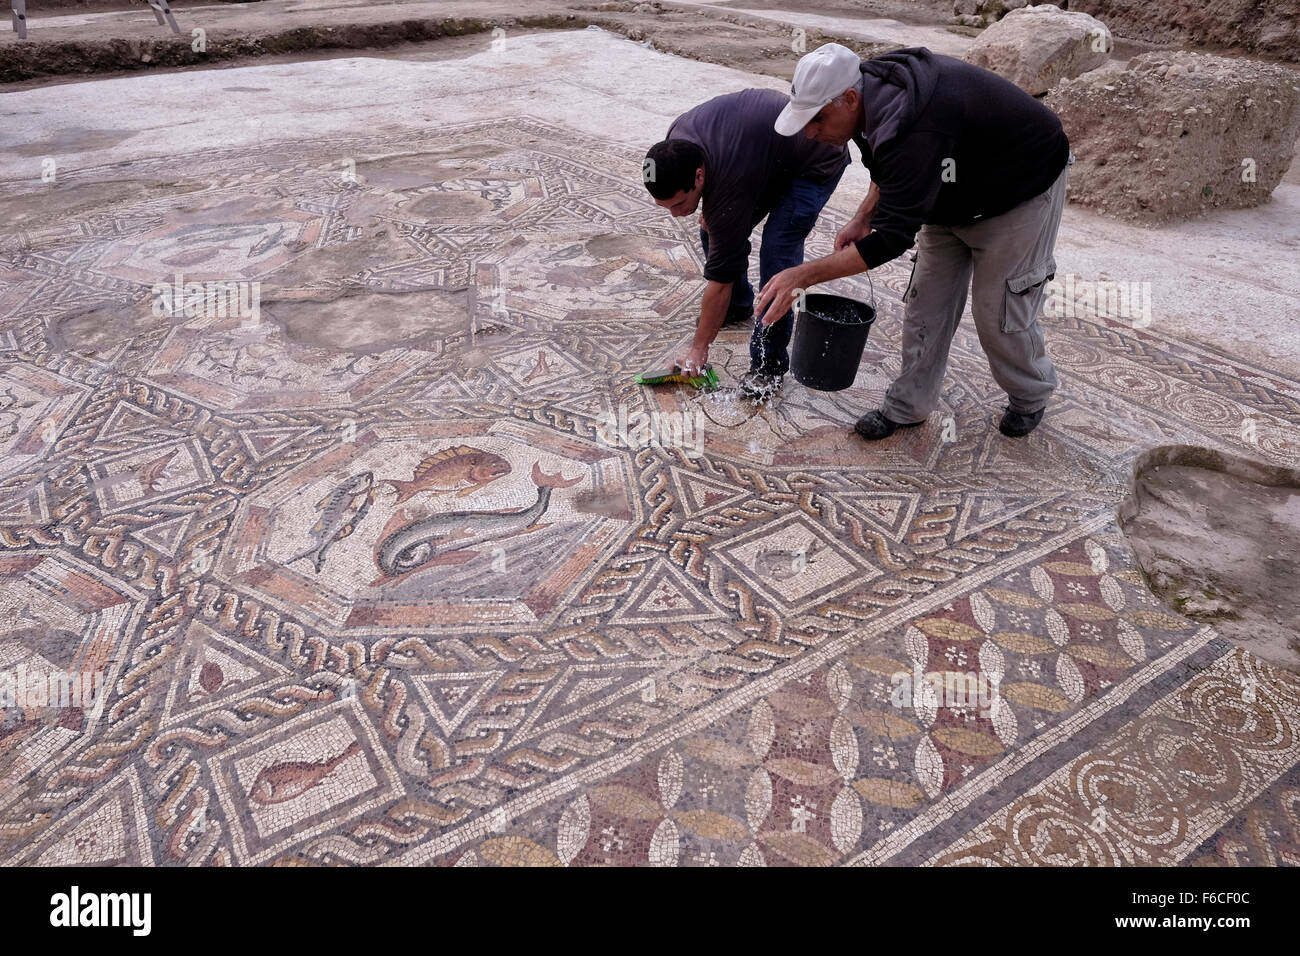 Workers of the Israel Antiquities Authority clean a 1,700 year old mosaic, which served as pavement for the courtyard in a villa during the Roman and Byzantine periods in the Israeli central city of Lod Israel Stock Photo